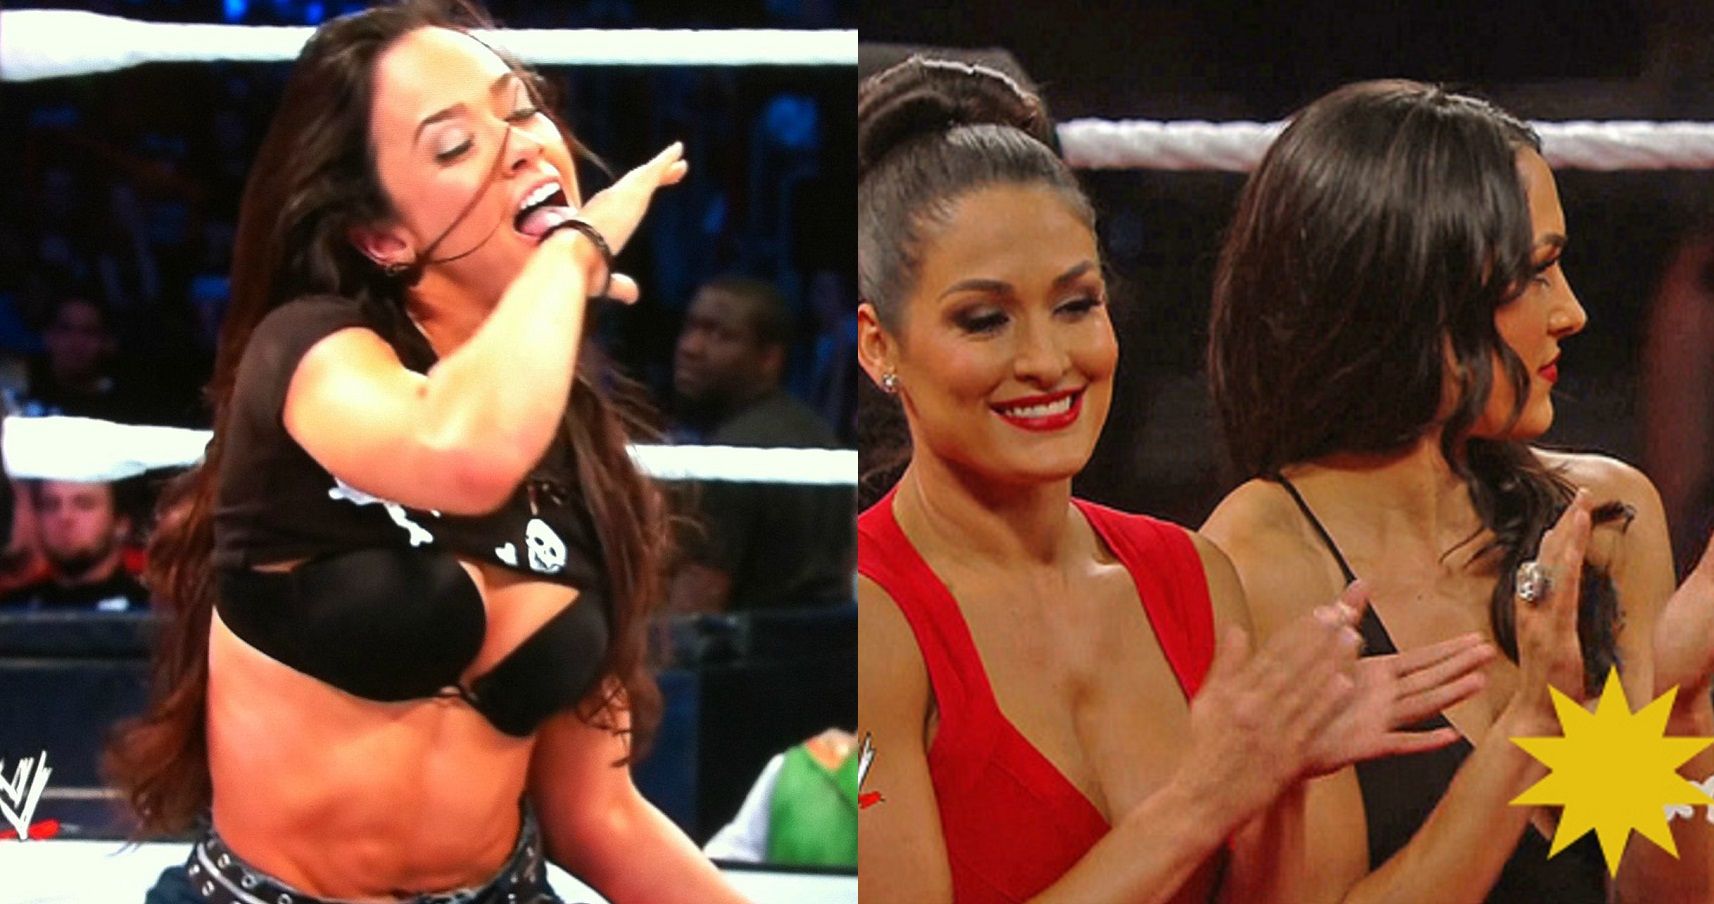 10 Outrageous WWE Diva Wardrobe Malfunctions | TheRichest